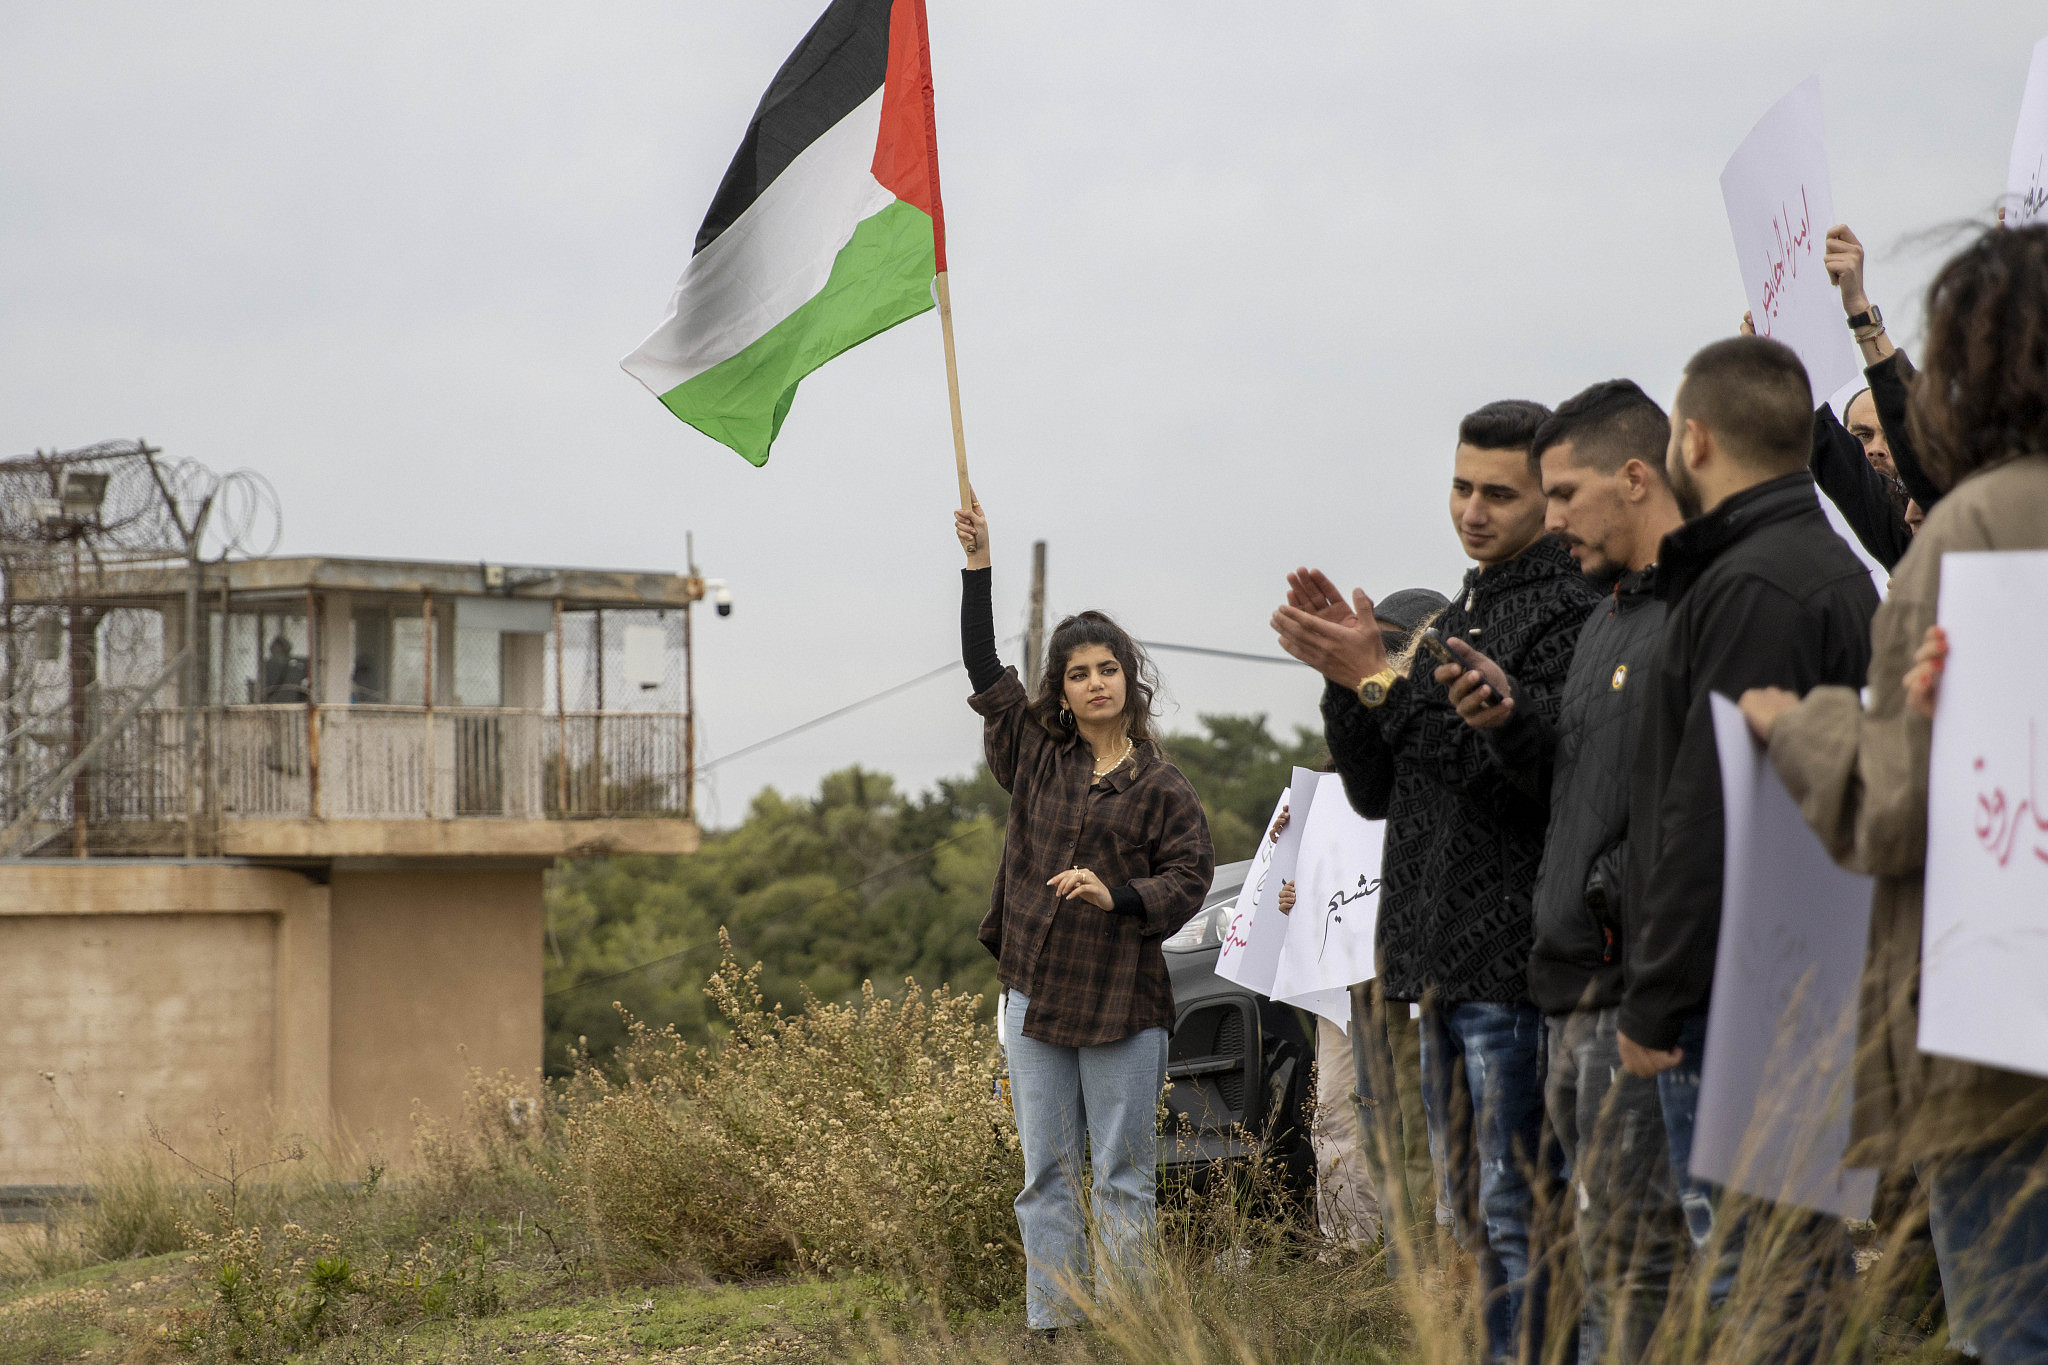 Protesters stand in solidarity with Palestinian political prisoners at Damoun Prison, Haifa, December 4, 2021. (Heather Sharon Weiss/Activestills)